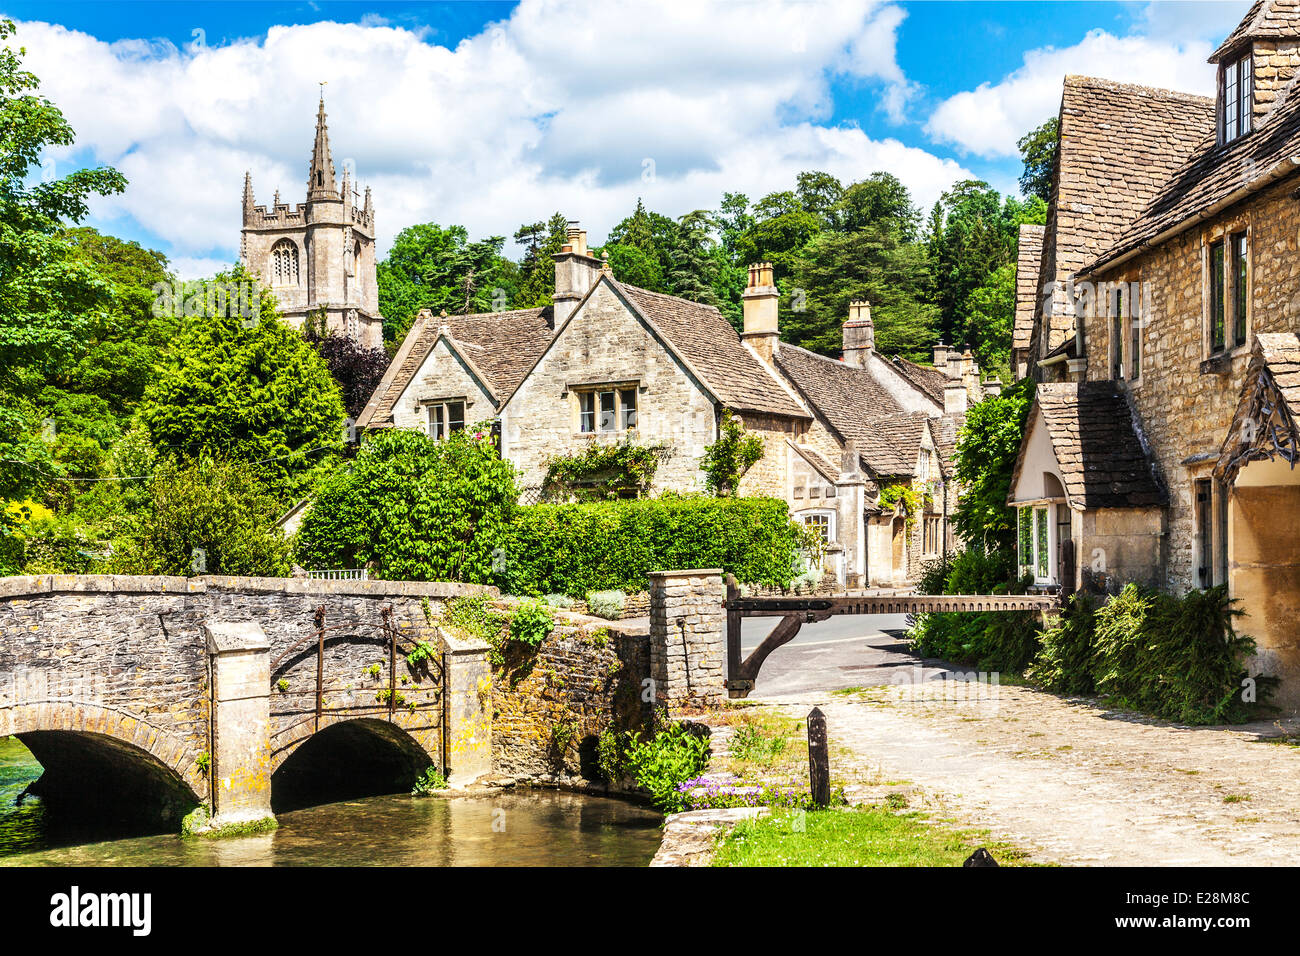 The picturesque Cotswold village of Castle Combe in Wiltshire. Stock Photo